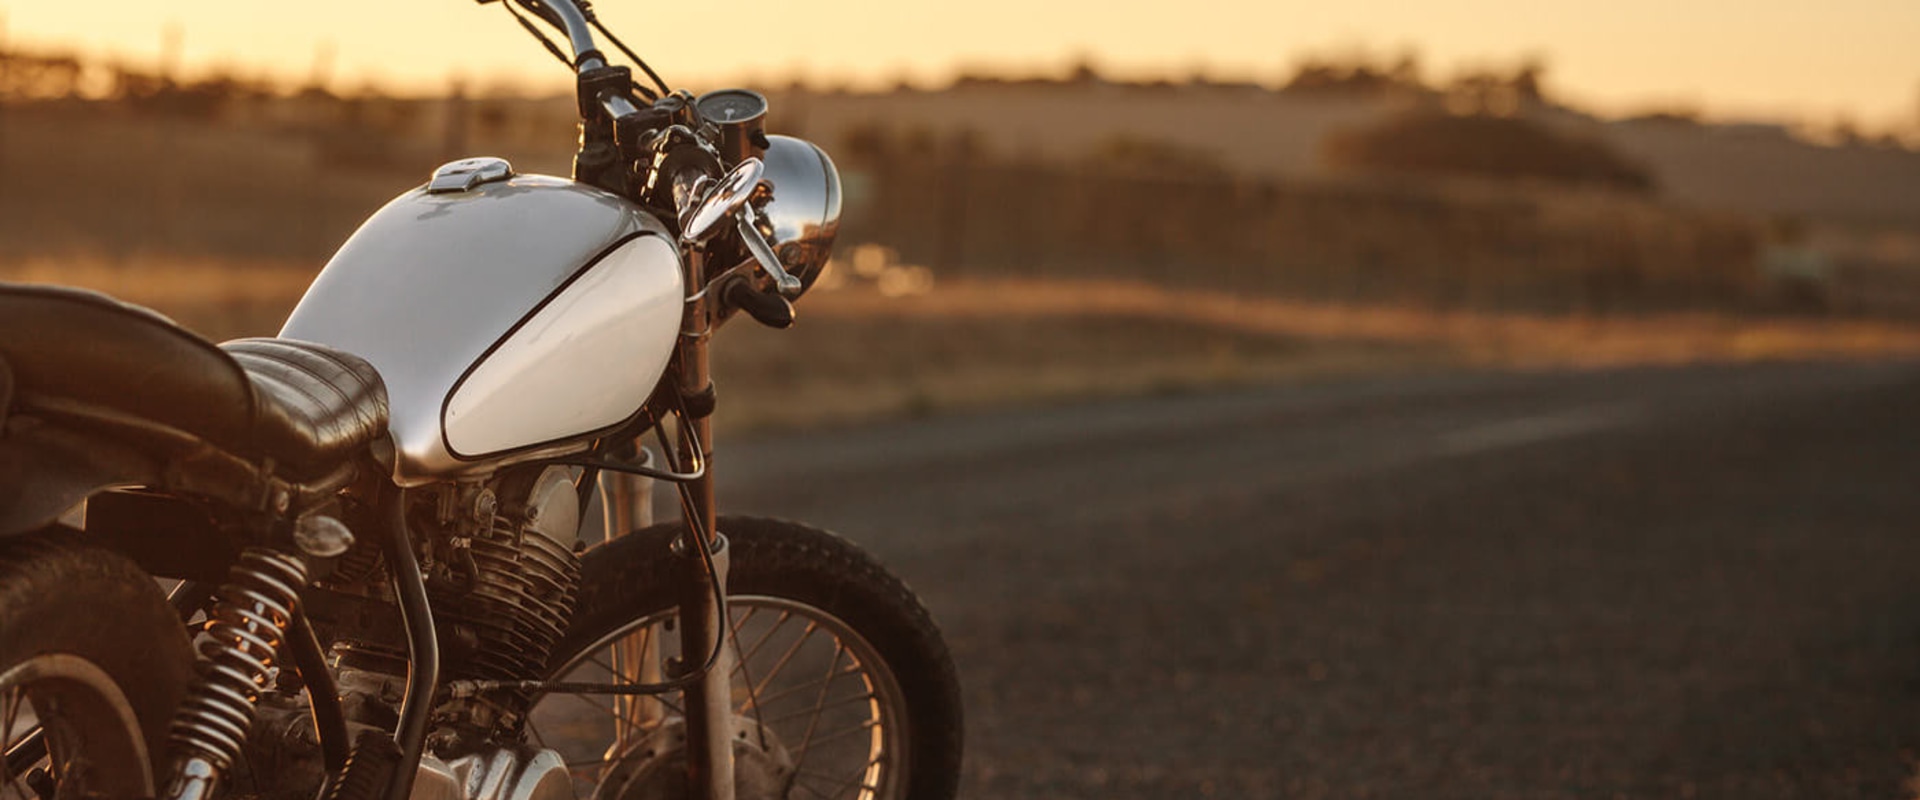 Does Motorcycle Insurance Cover Trikes and Sidecars?